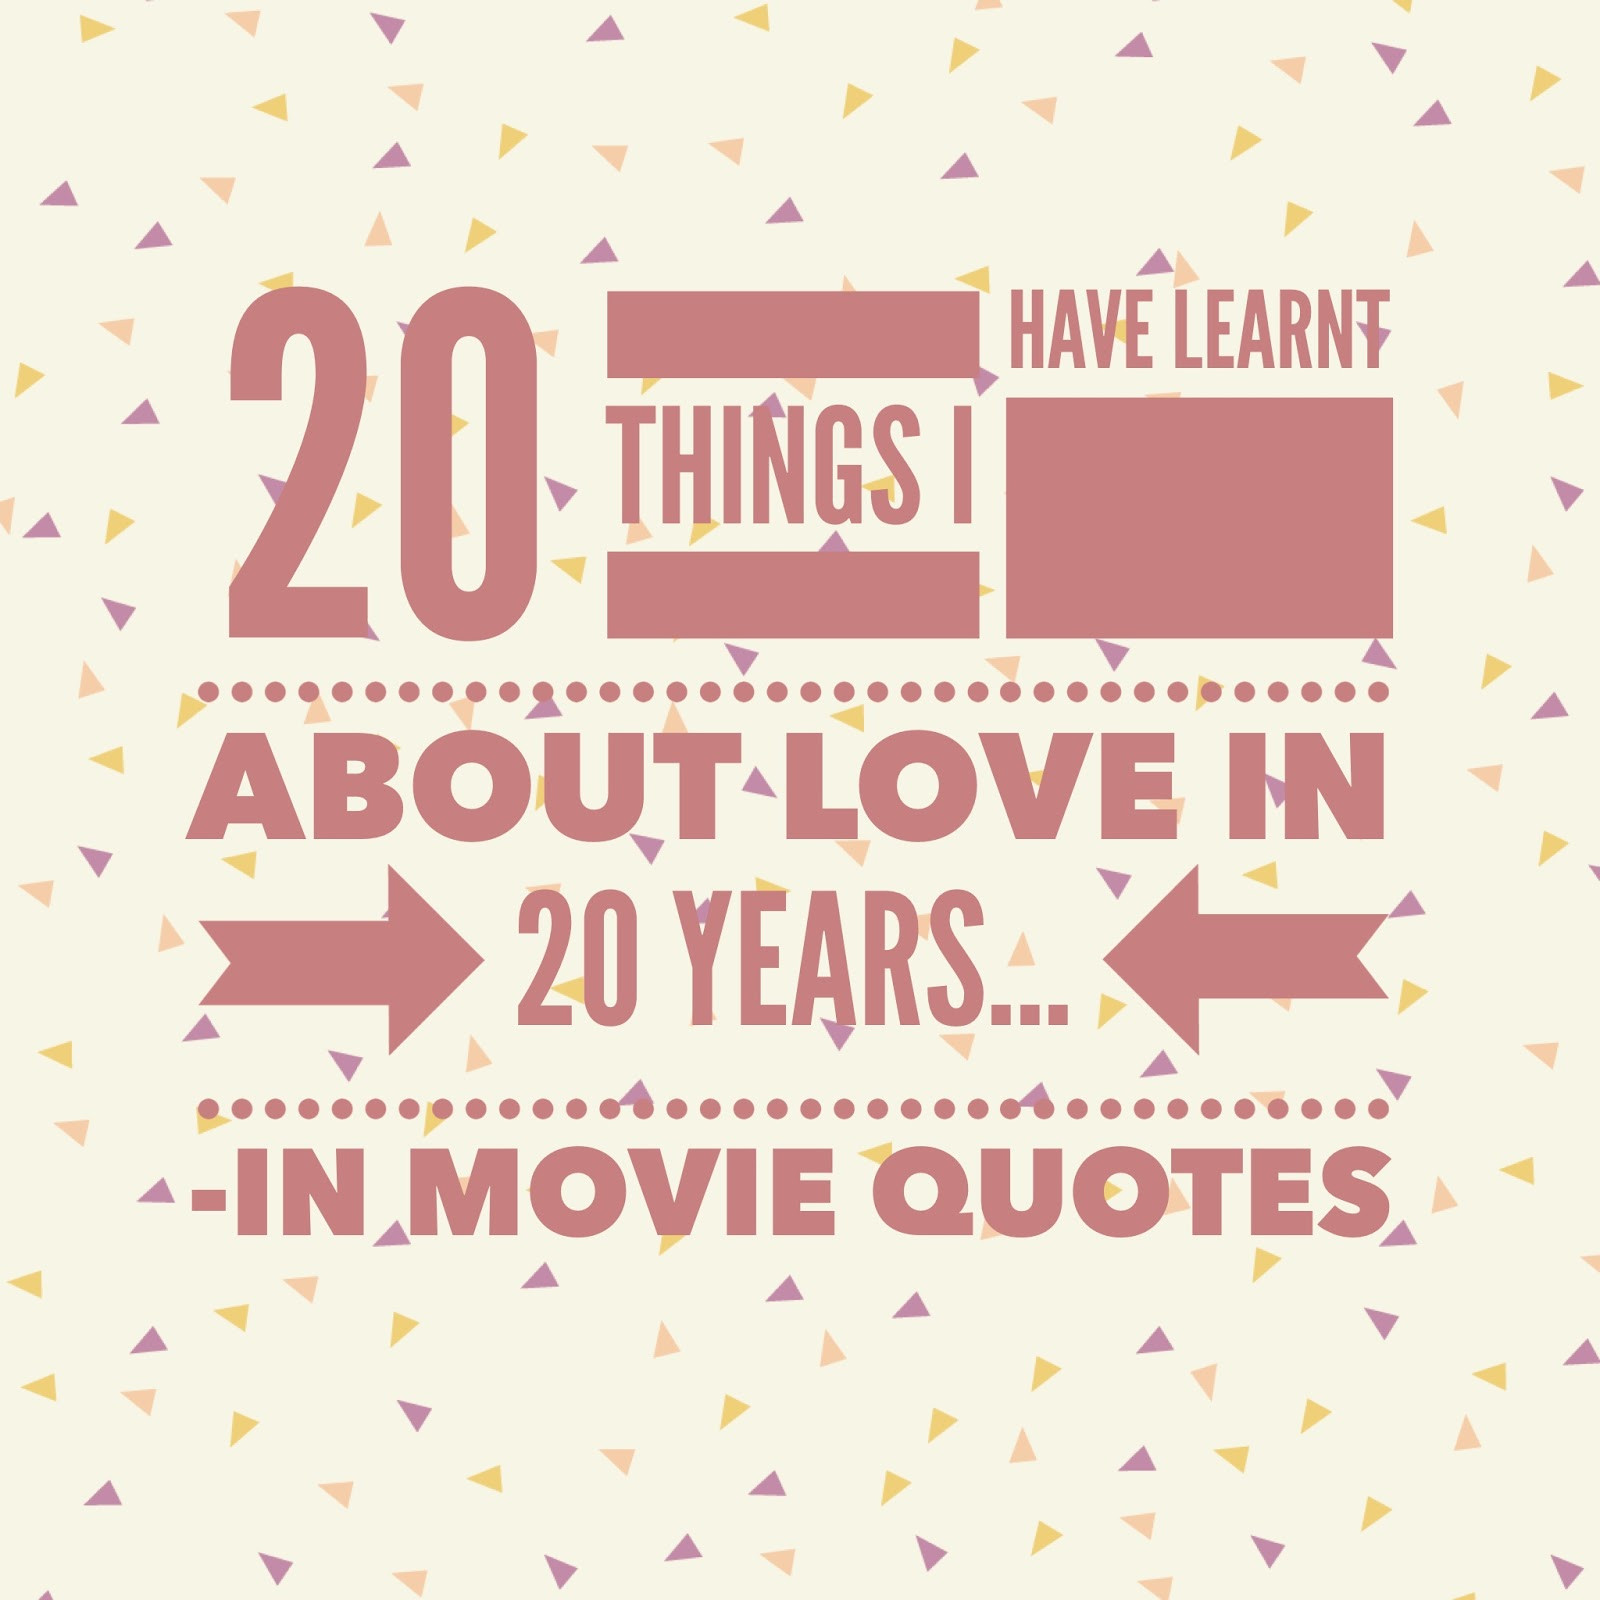 20 Years Of Marriage Quotes
 20 Things I ve Learnt about Love in 20 years…in movie